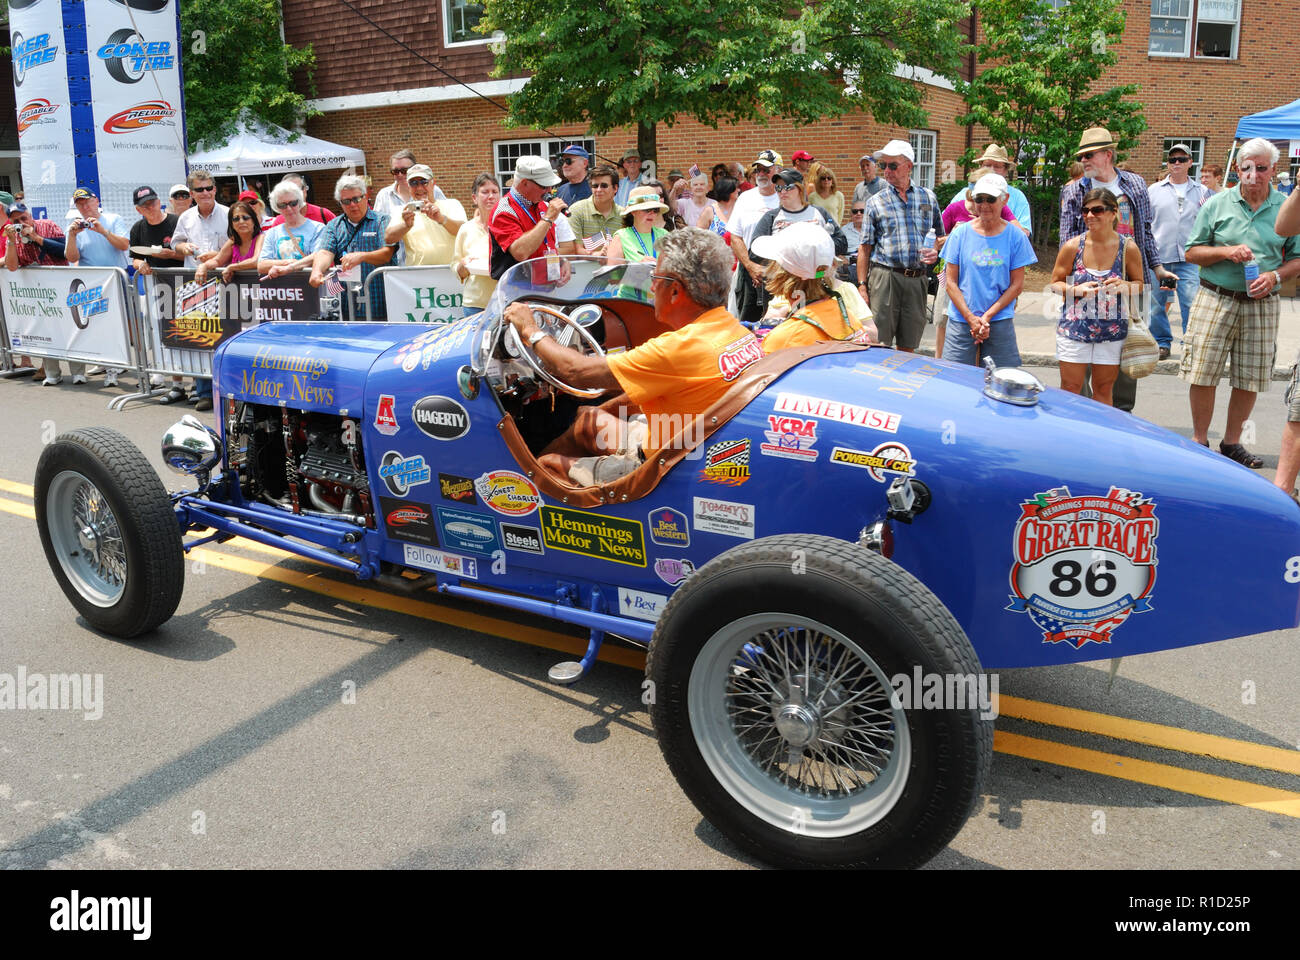 Drivers complete one lap of race in Fairport NY... Stock Photo